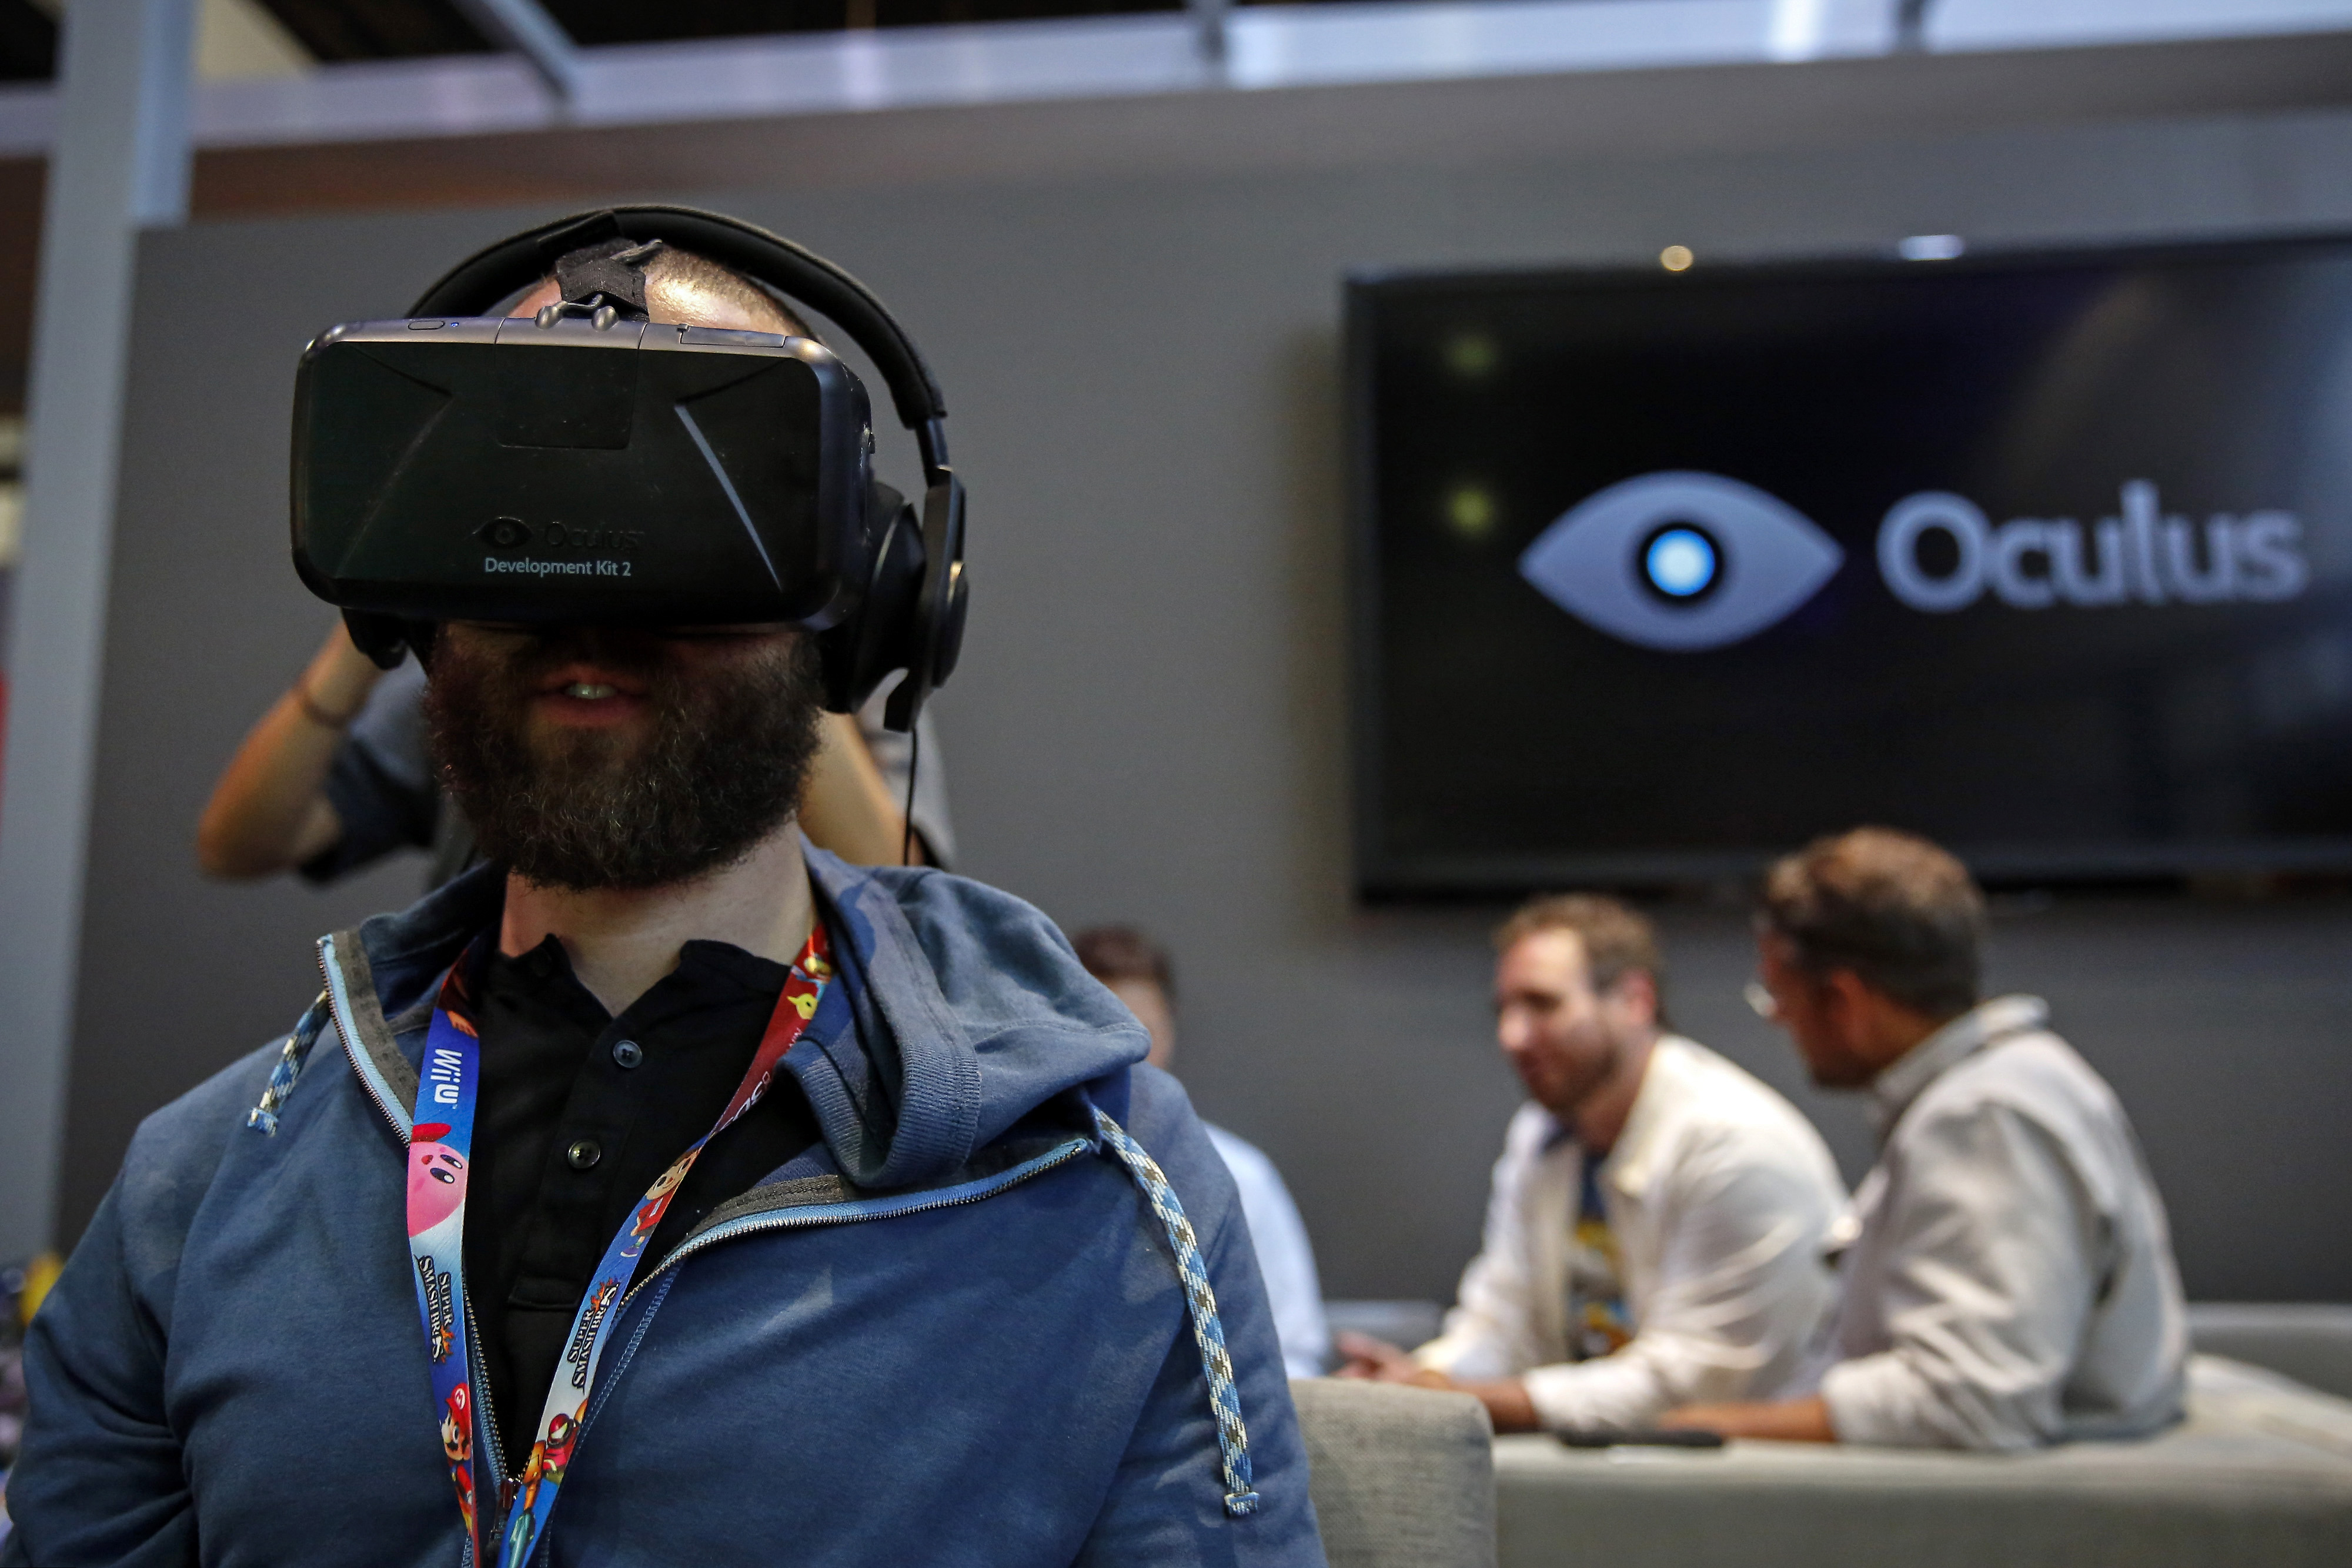 An attendee wears an Oculus VR Inc. Rift Development Kit 2 headset to play a video game during the E3 Electronic Entertainment Expo in Los Angeles, California, U.S., on Wednesday, June 11, 2014. (Patrick T. Fallon—Bloomberg/Getty Images)